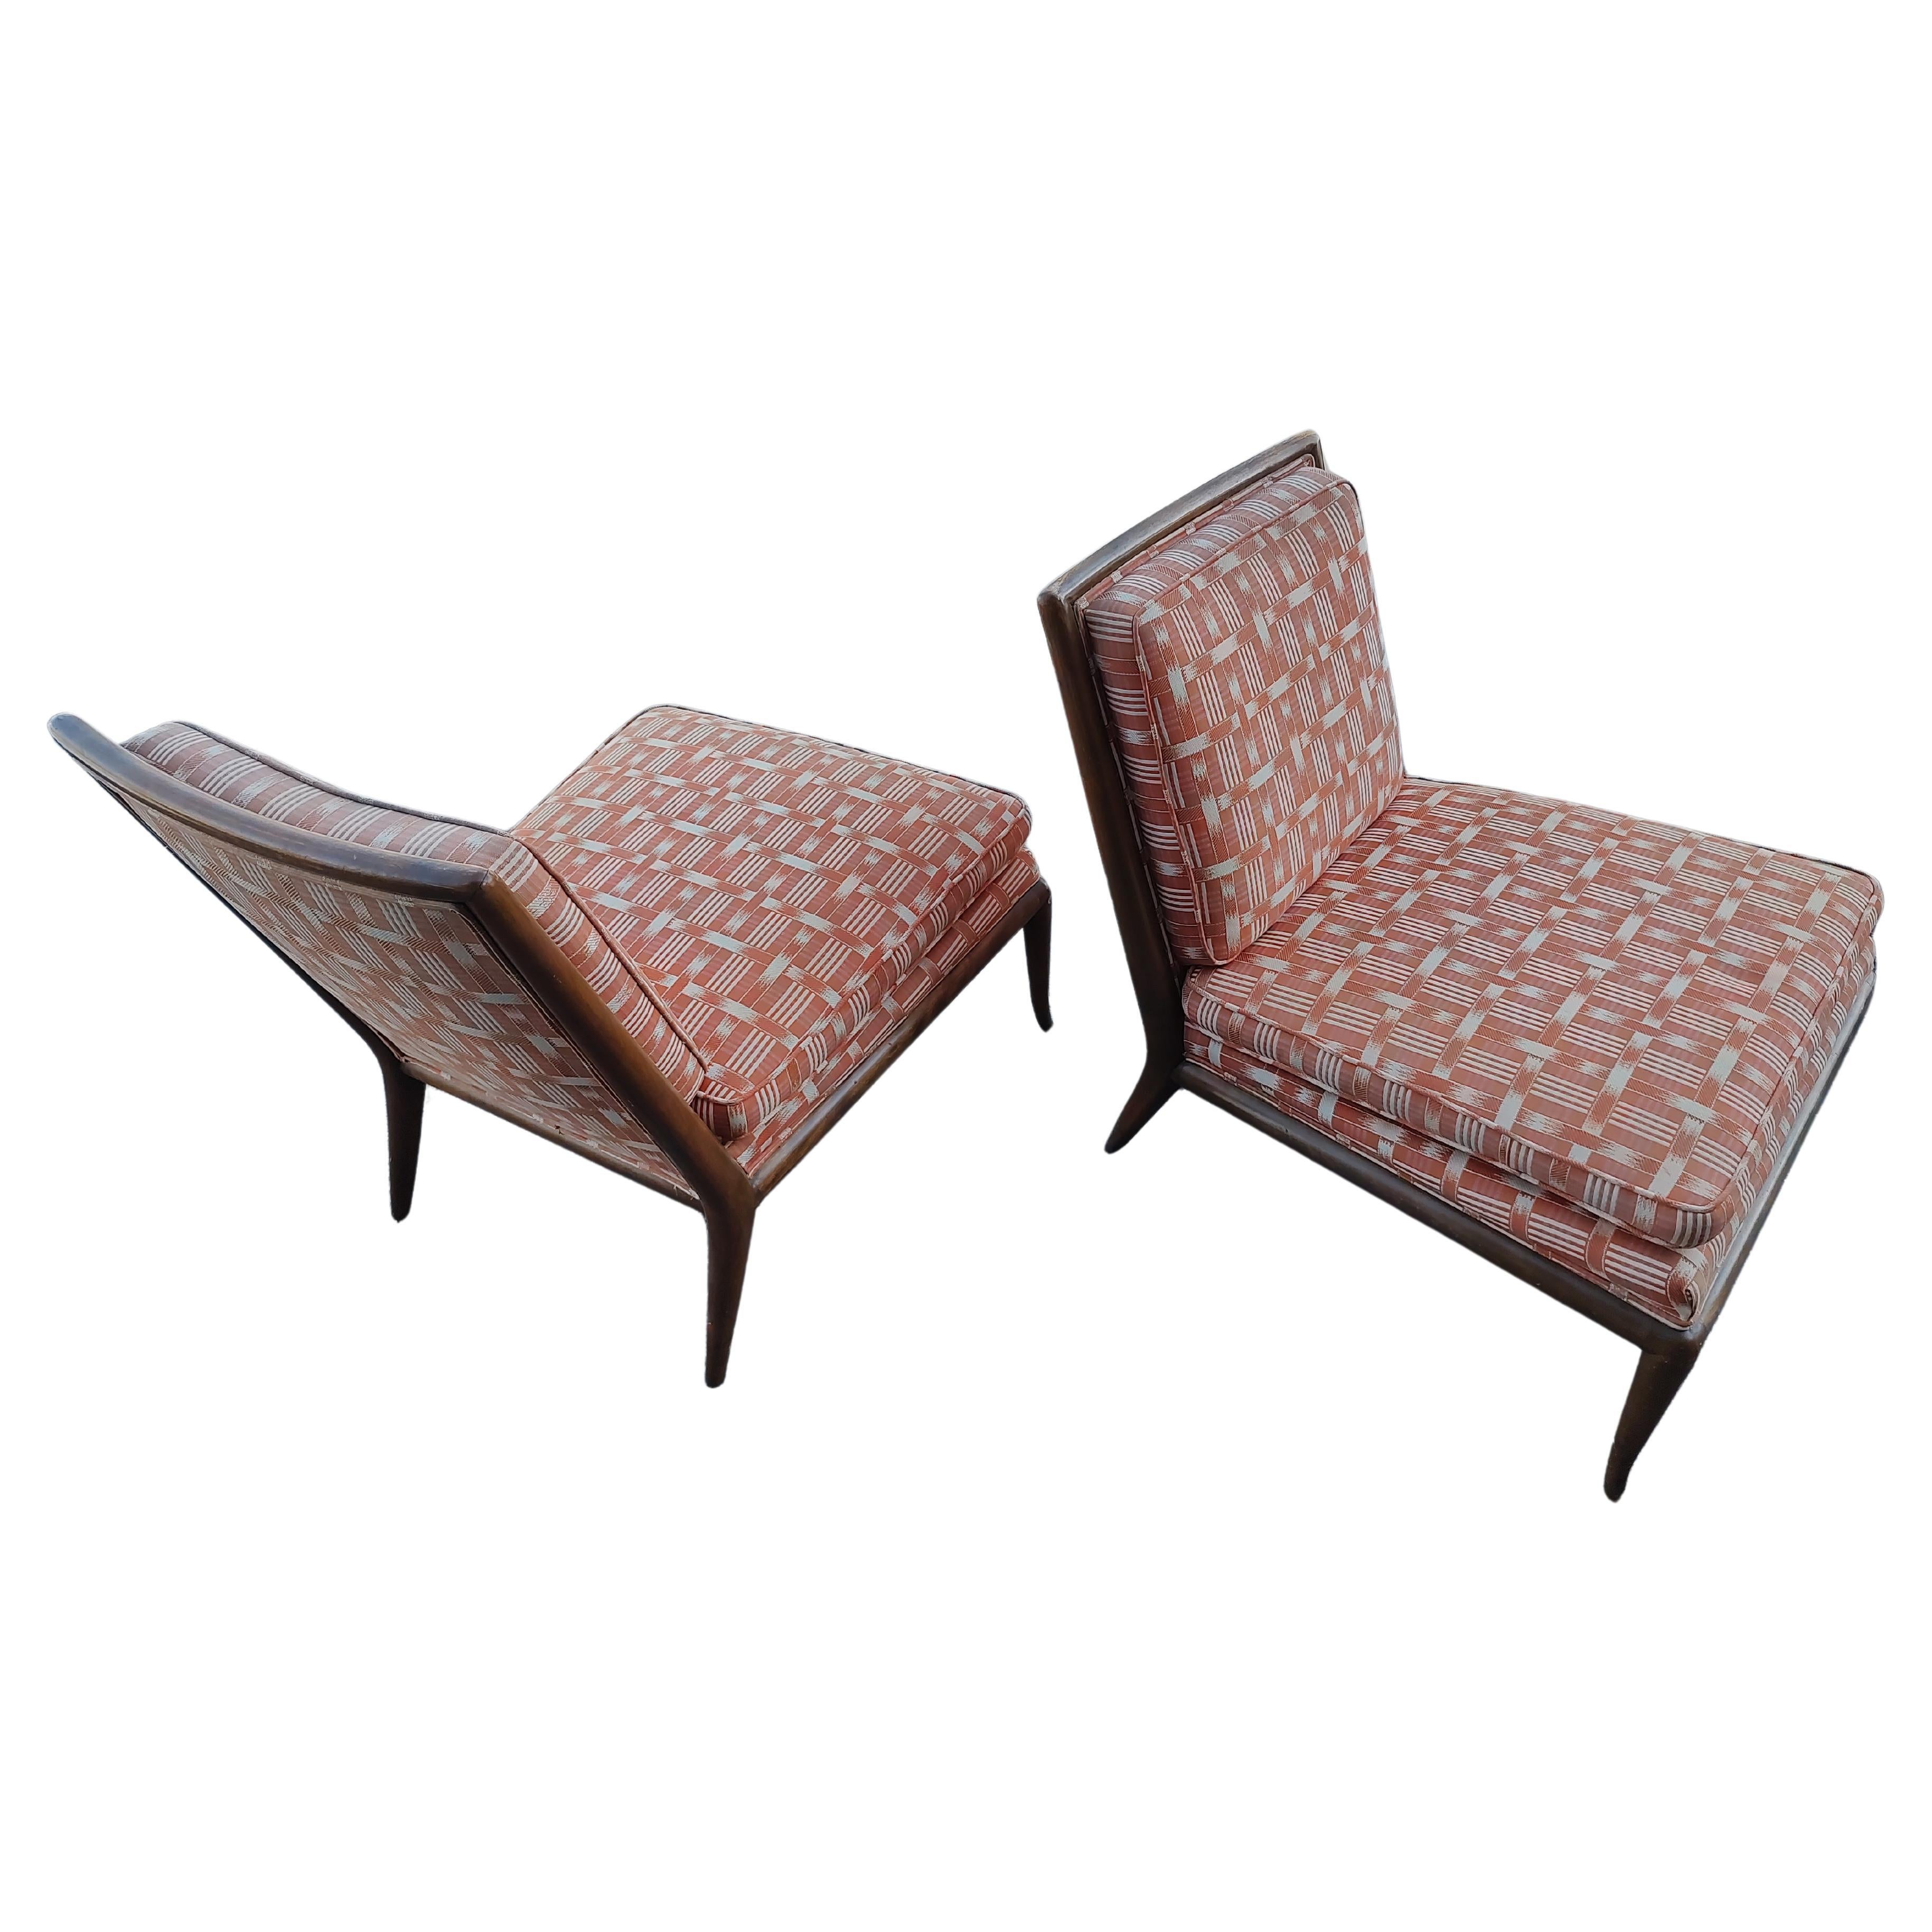 Hand-Crafted Pair of Mid Century Modern Walnut Lounge Chairs By Robs johns Gibbons  For Sale